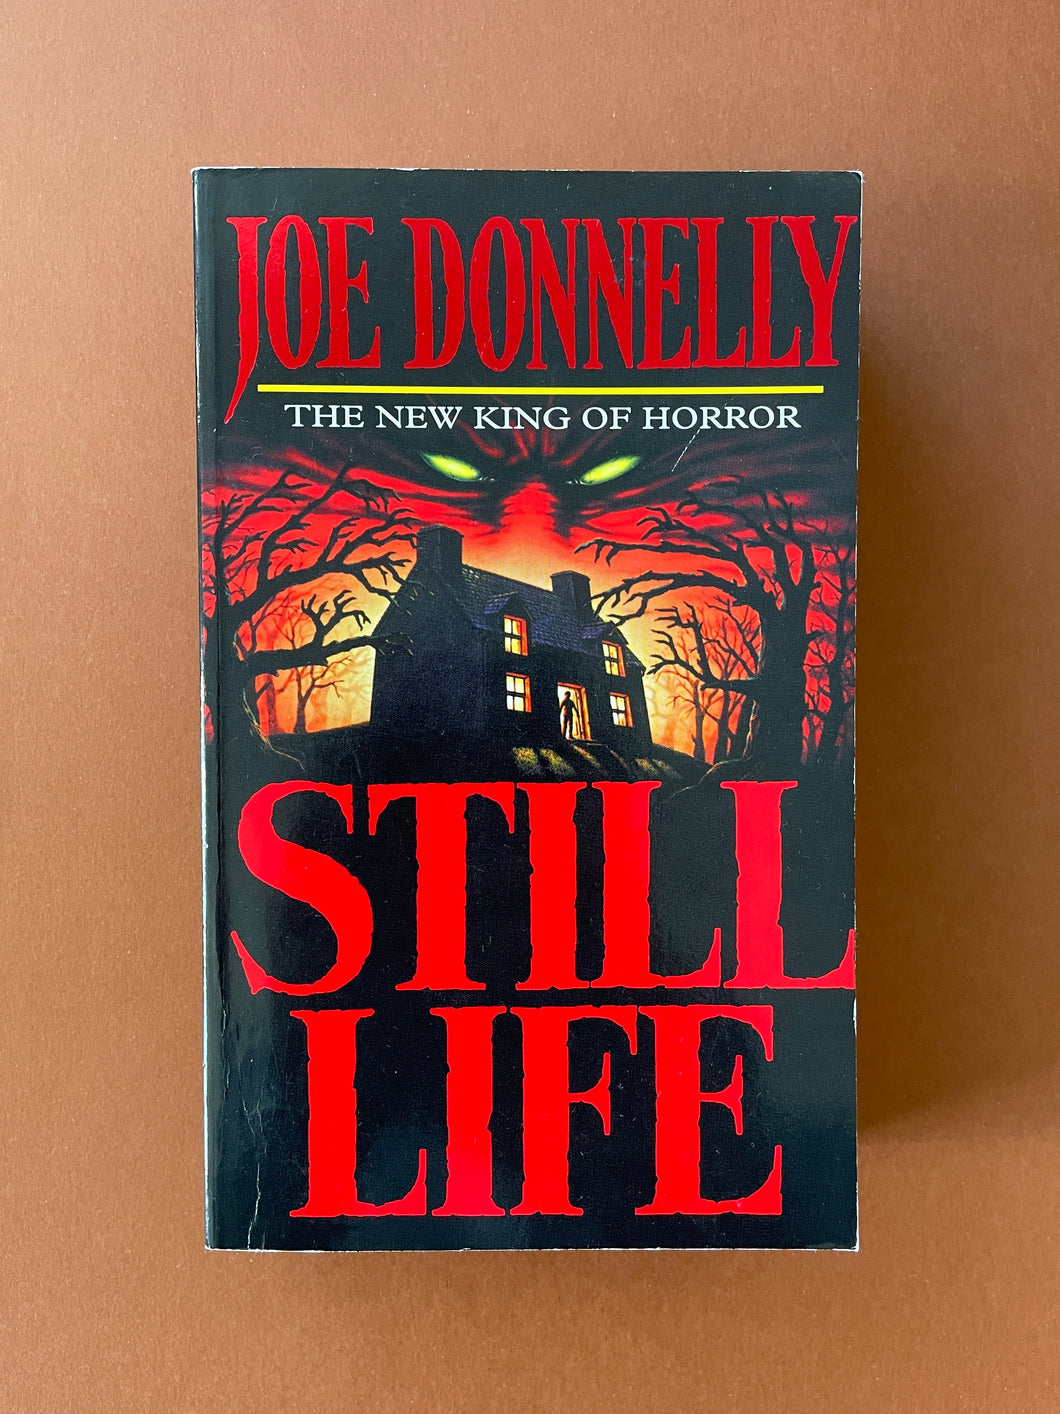 Still Life by Joe Donnelly: photo of the front cover which shows very minor scuff marks and creasing along the edges.